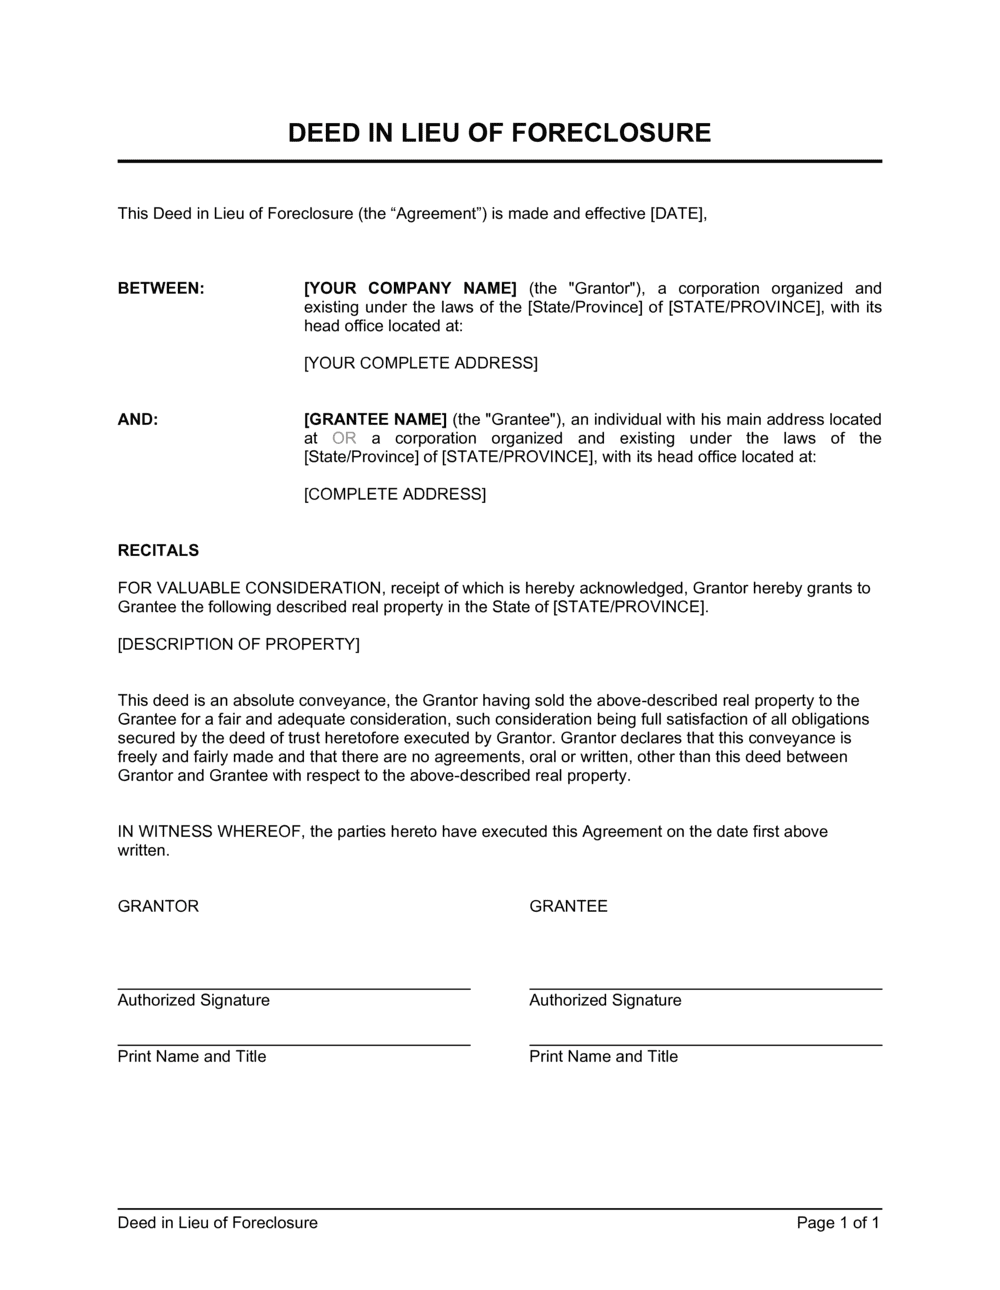 Deed In Lieu of Foreclosure Template by BusinessinaBox™